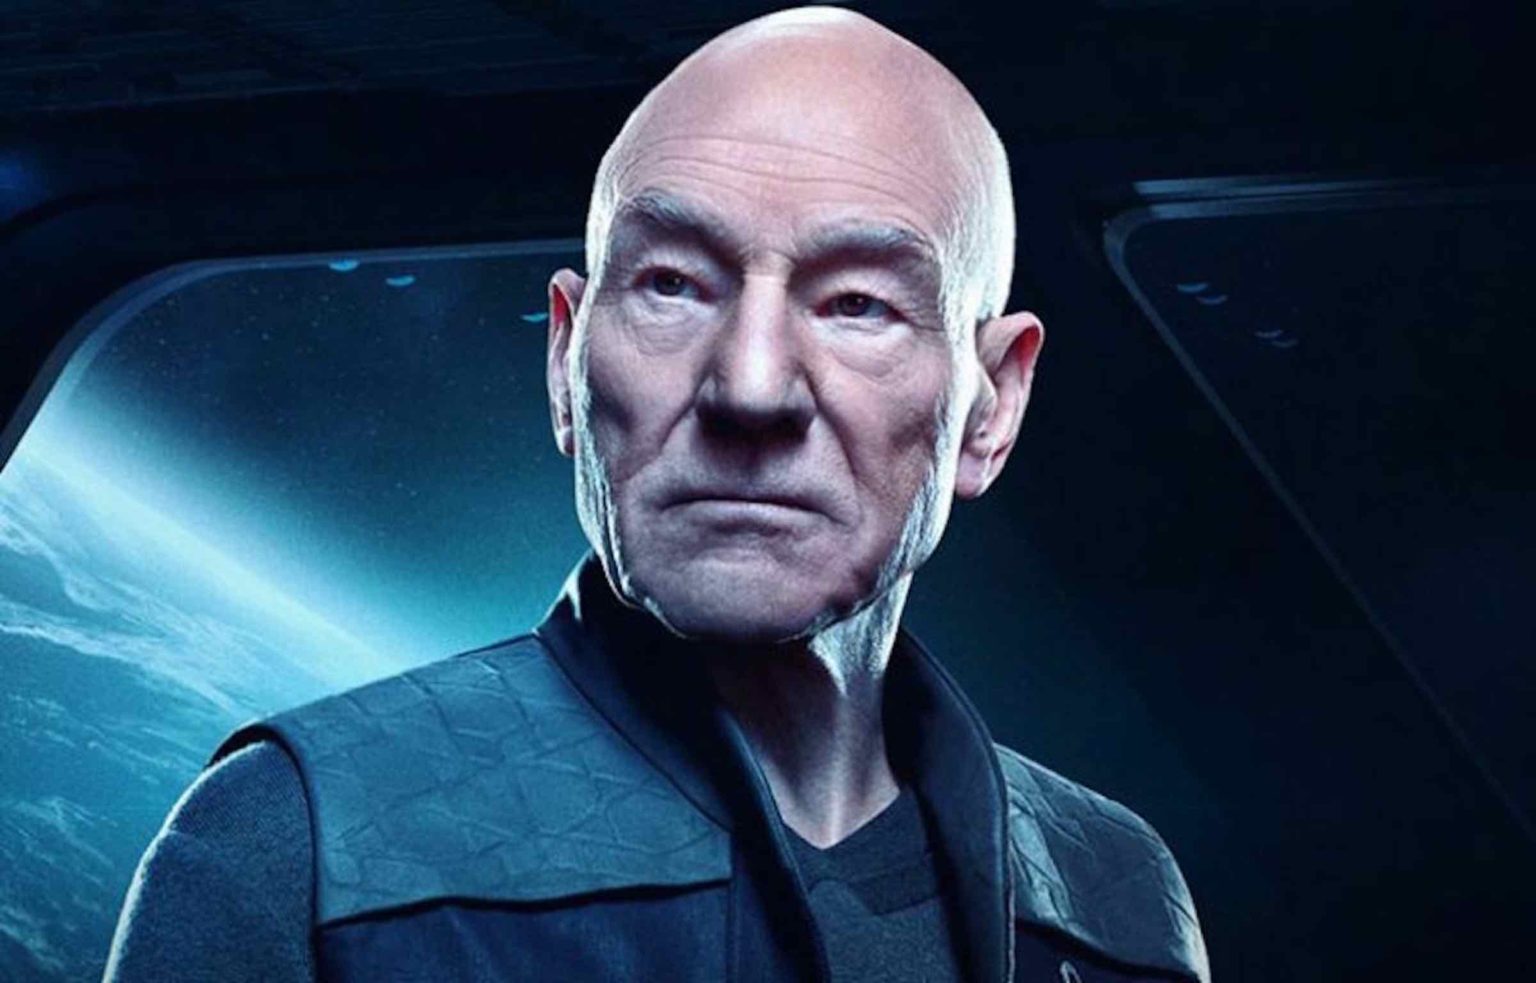 'Star Trek: Picard' was terrible. It was a mind-numbing slog that became more incomprehensible the longer it went on. Here's why.